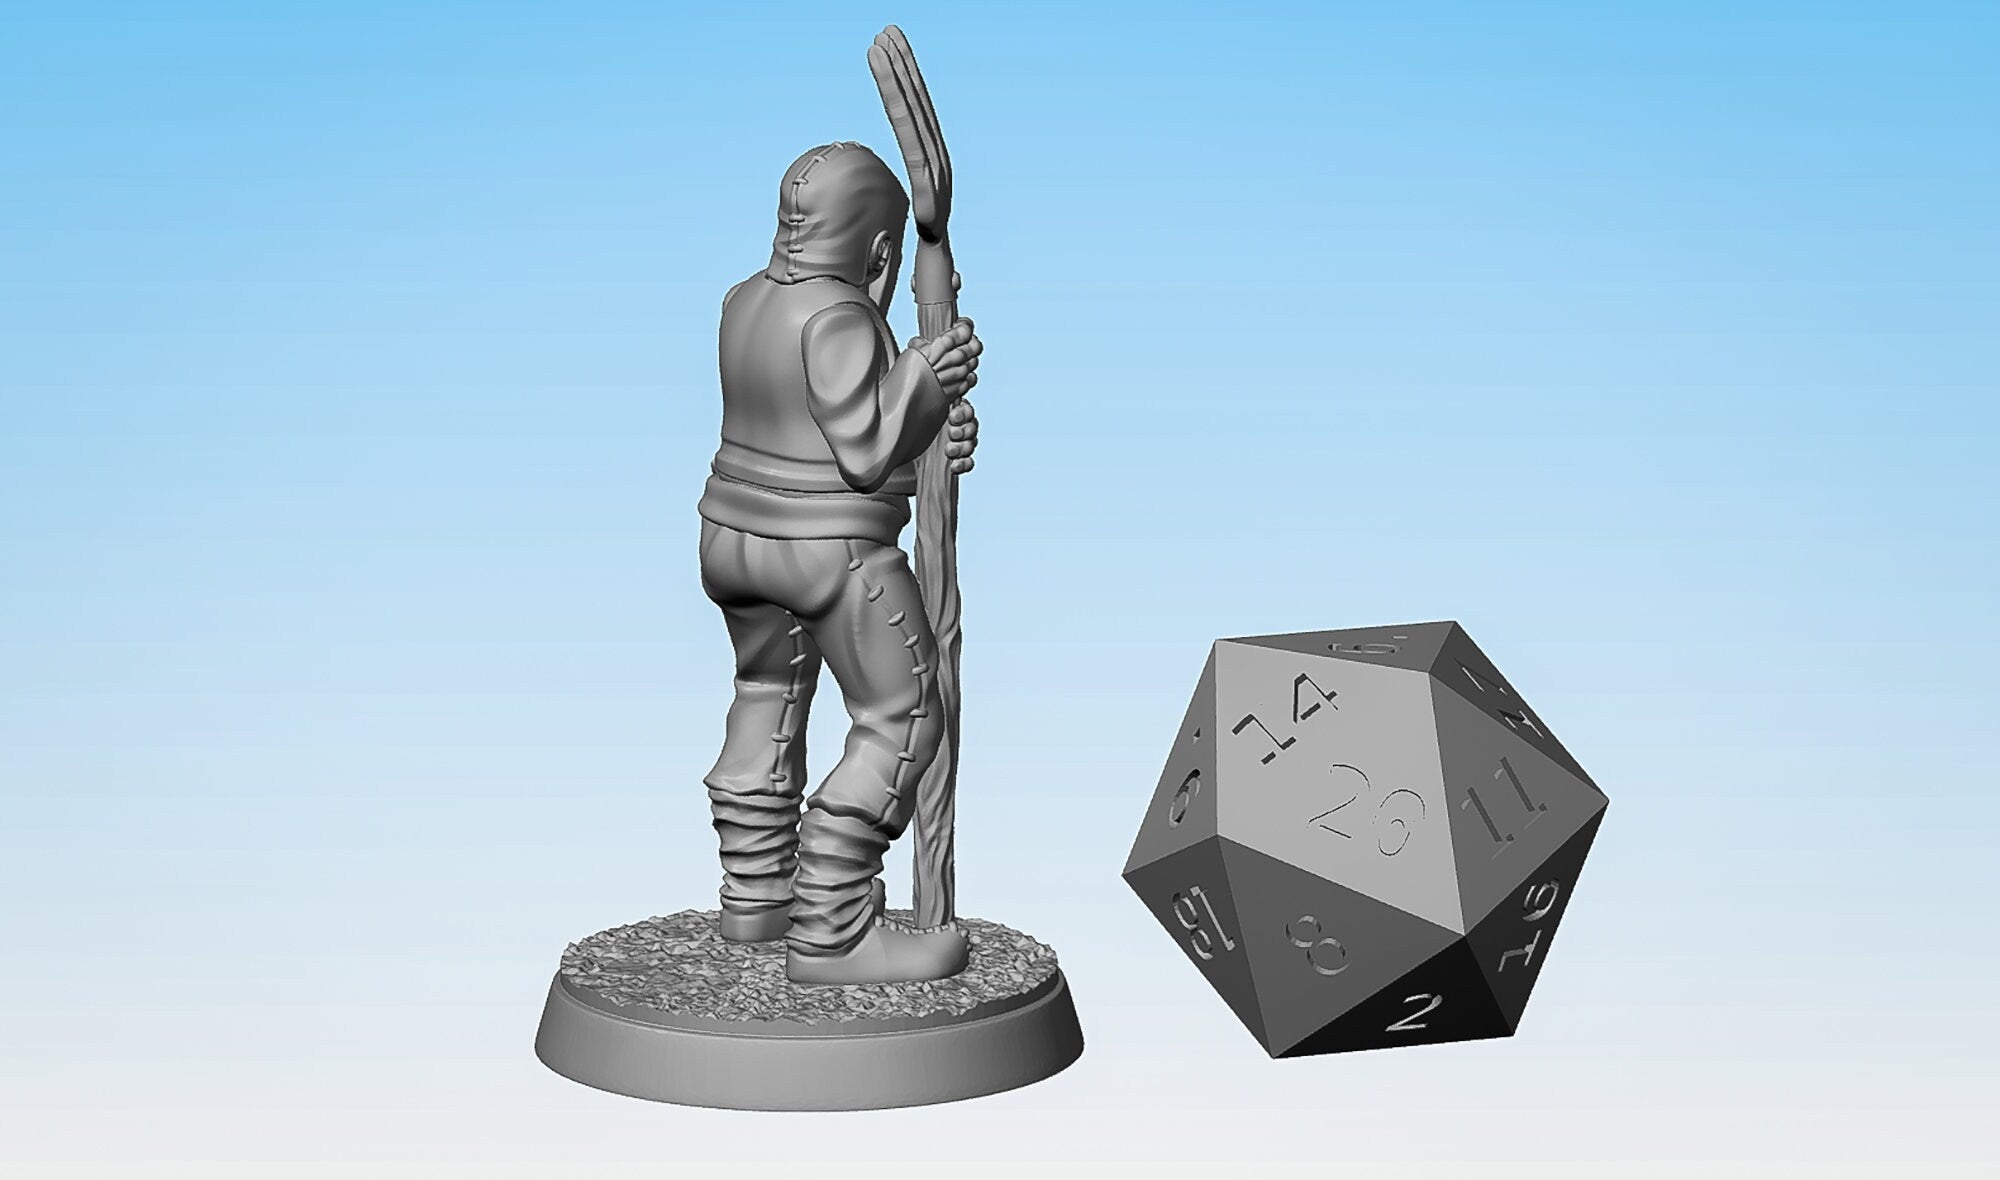 FARMER "Pitchfork" | Townsfolk Npc | Dungeons and Dragons | DnD | Pathfinder | Tabletop | RPG | Hero Size | 28 mm-Role Playing Miniatures